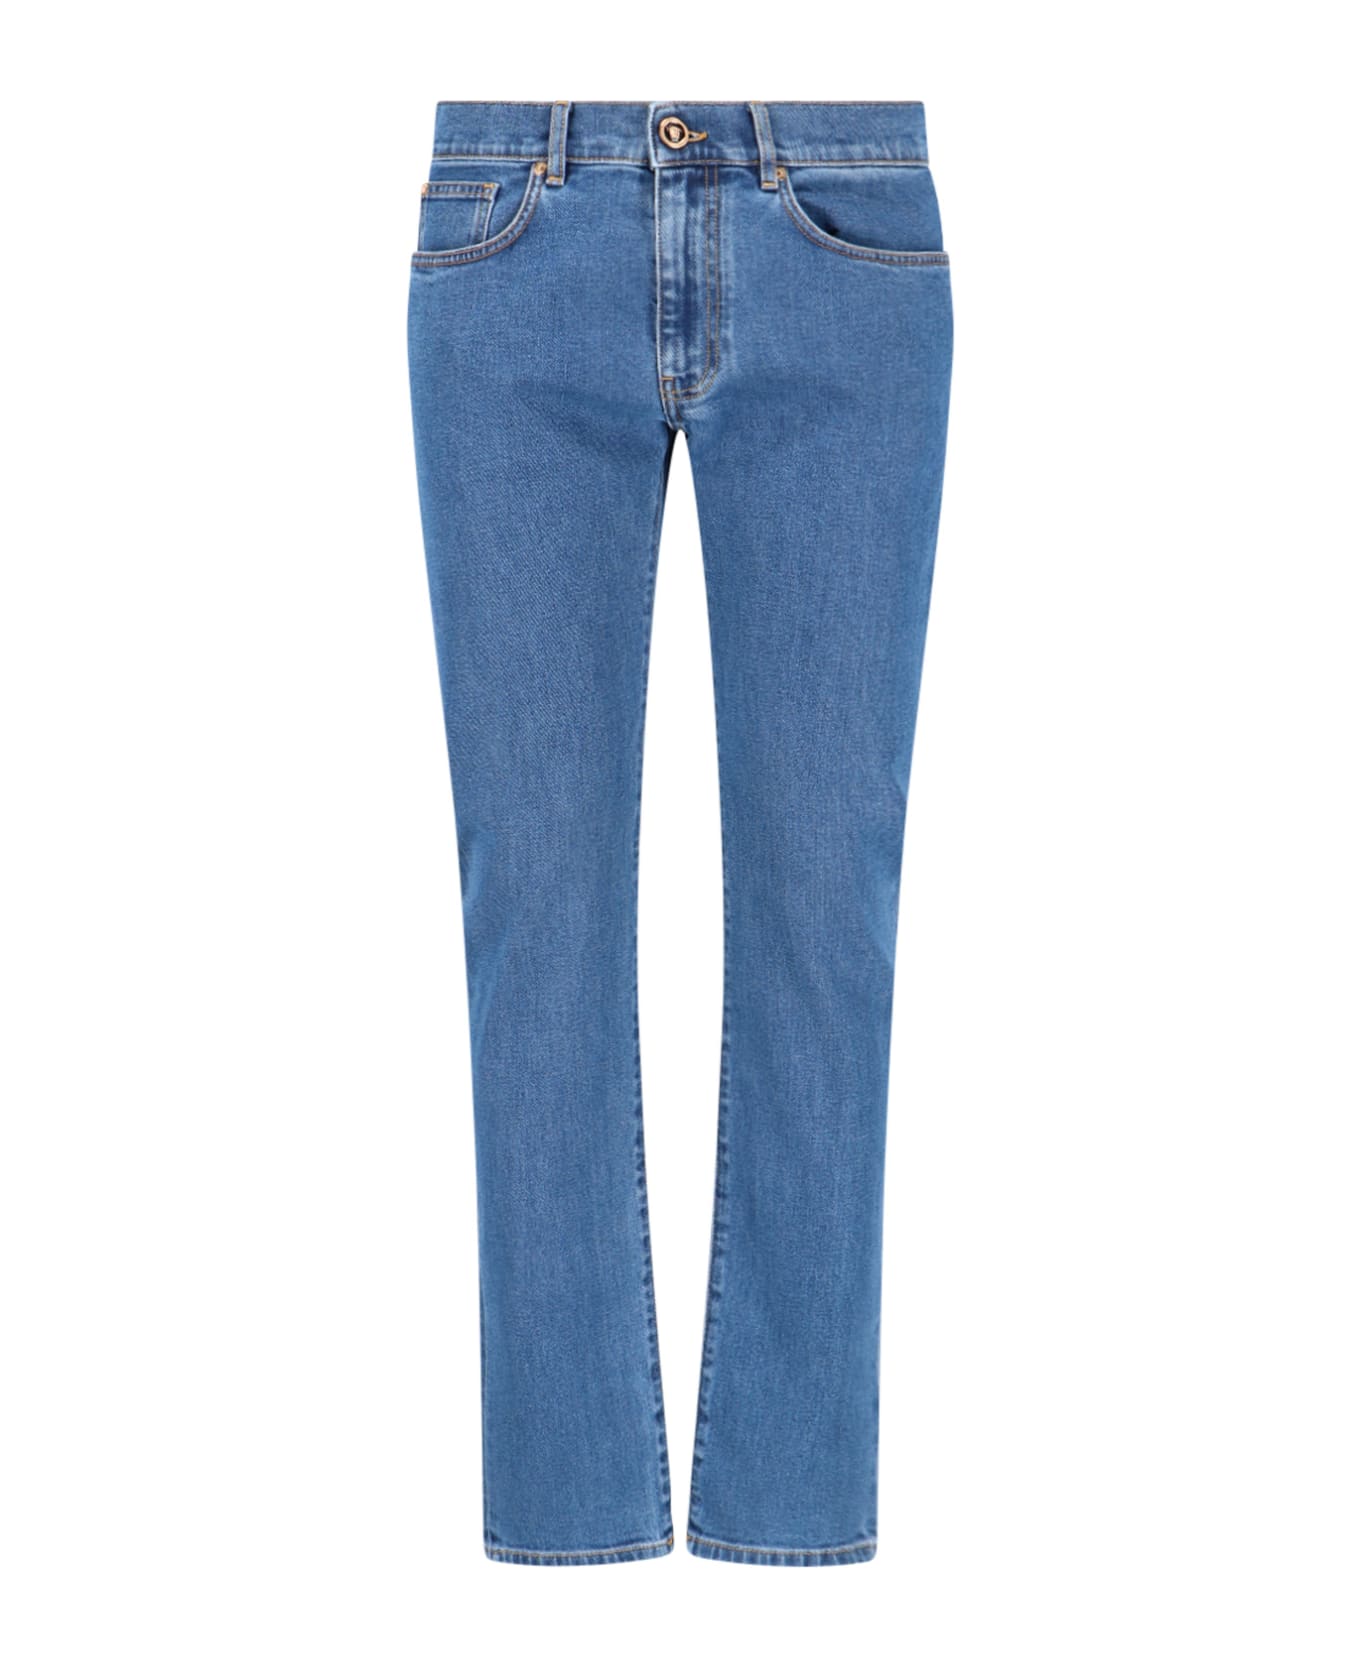 Versace Blue Fitted Jeans With Logo Embroidered And Botton In Cotton Blend Denim Woman - Blue